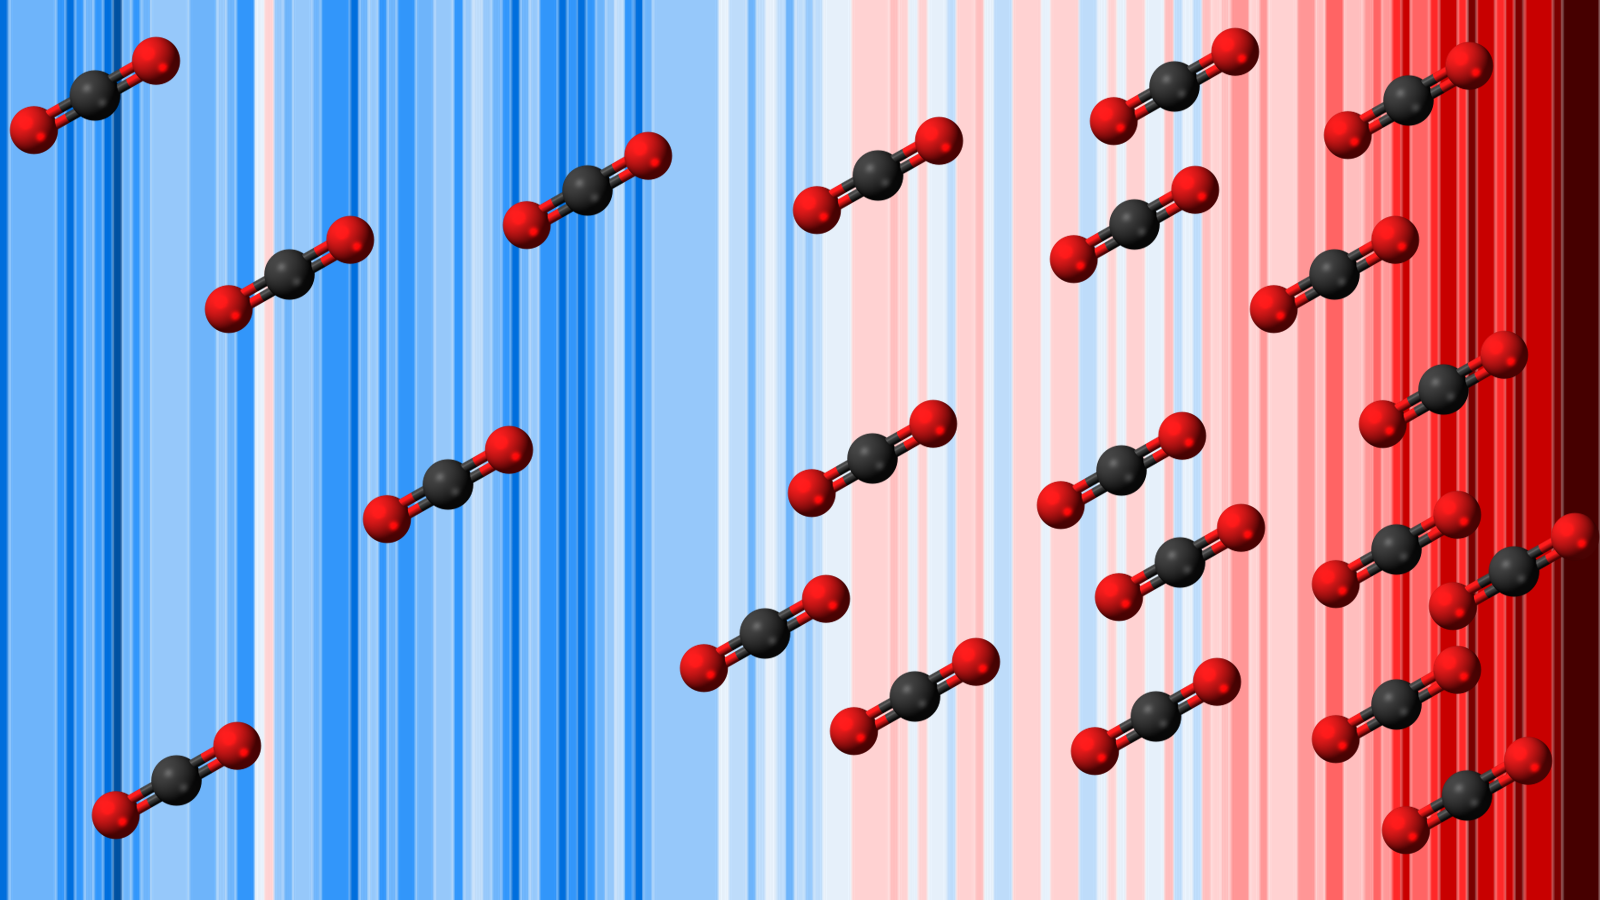 image-of-increasing-numbers-of-carbon-dioxide-molecules-overlaying-a-blue-to-red-warming-gradient